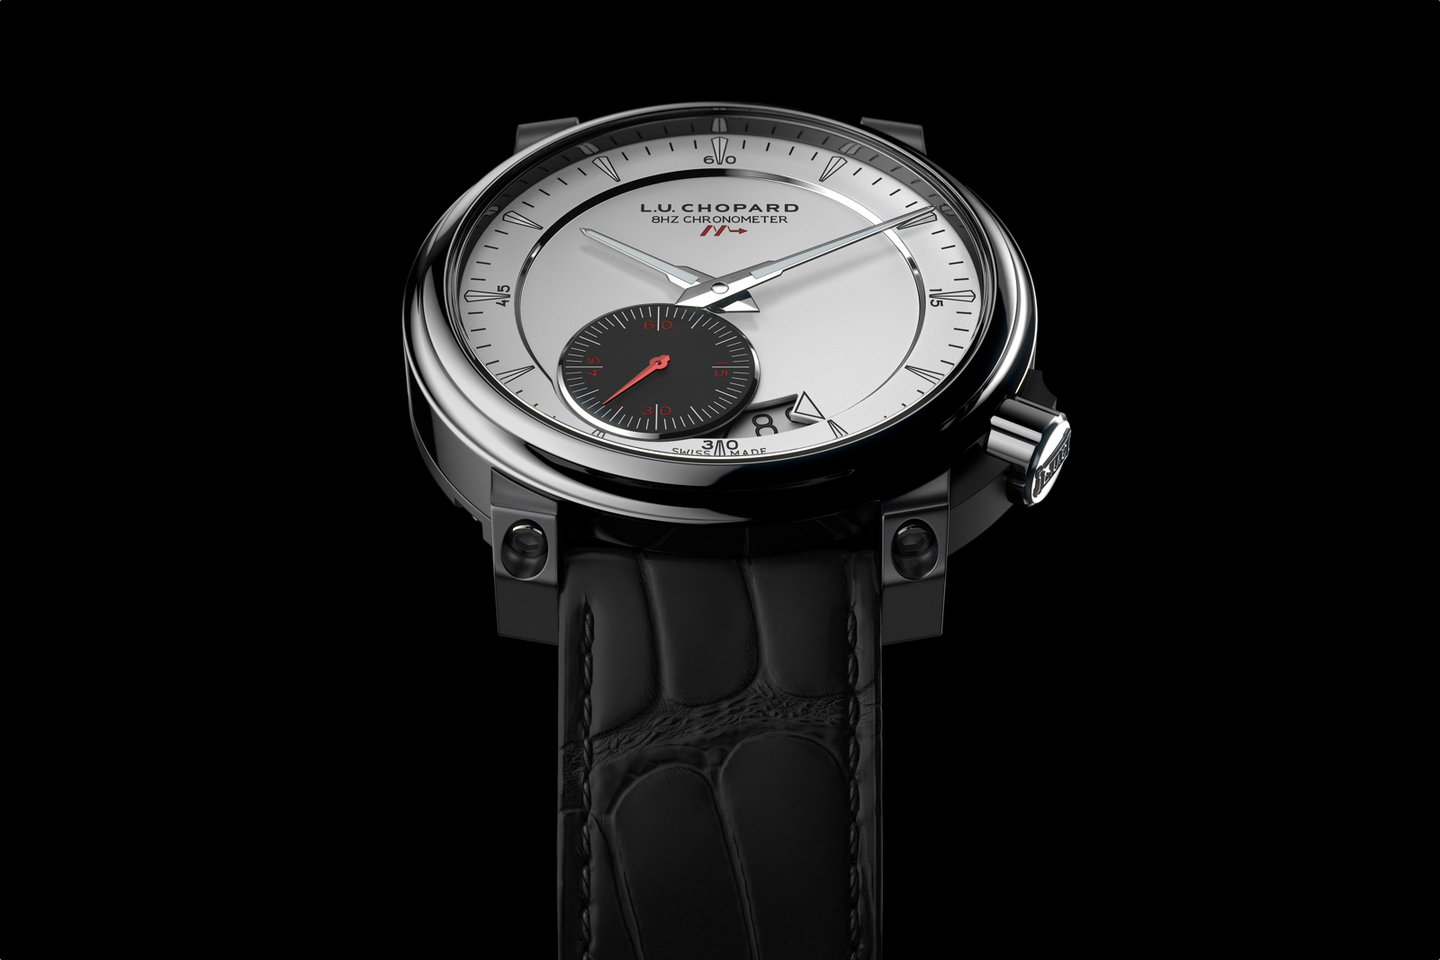 Chopard reveals a new high frequency wristwatch at Baselworld